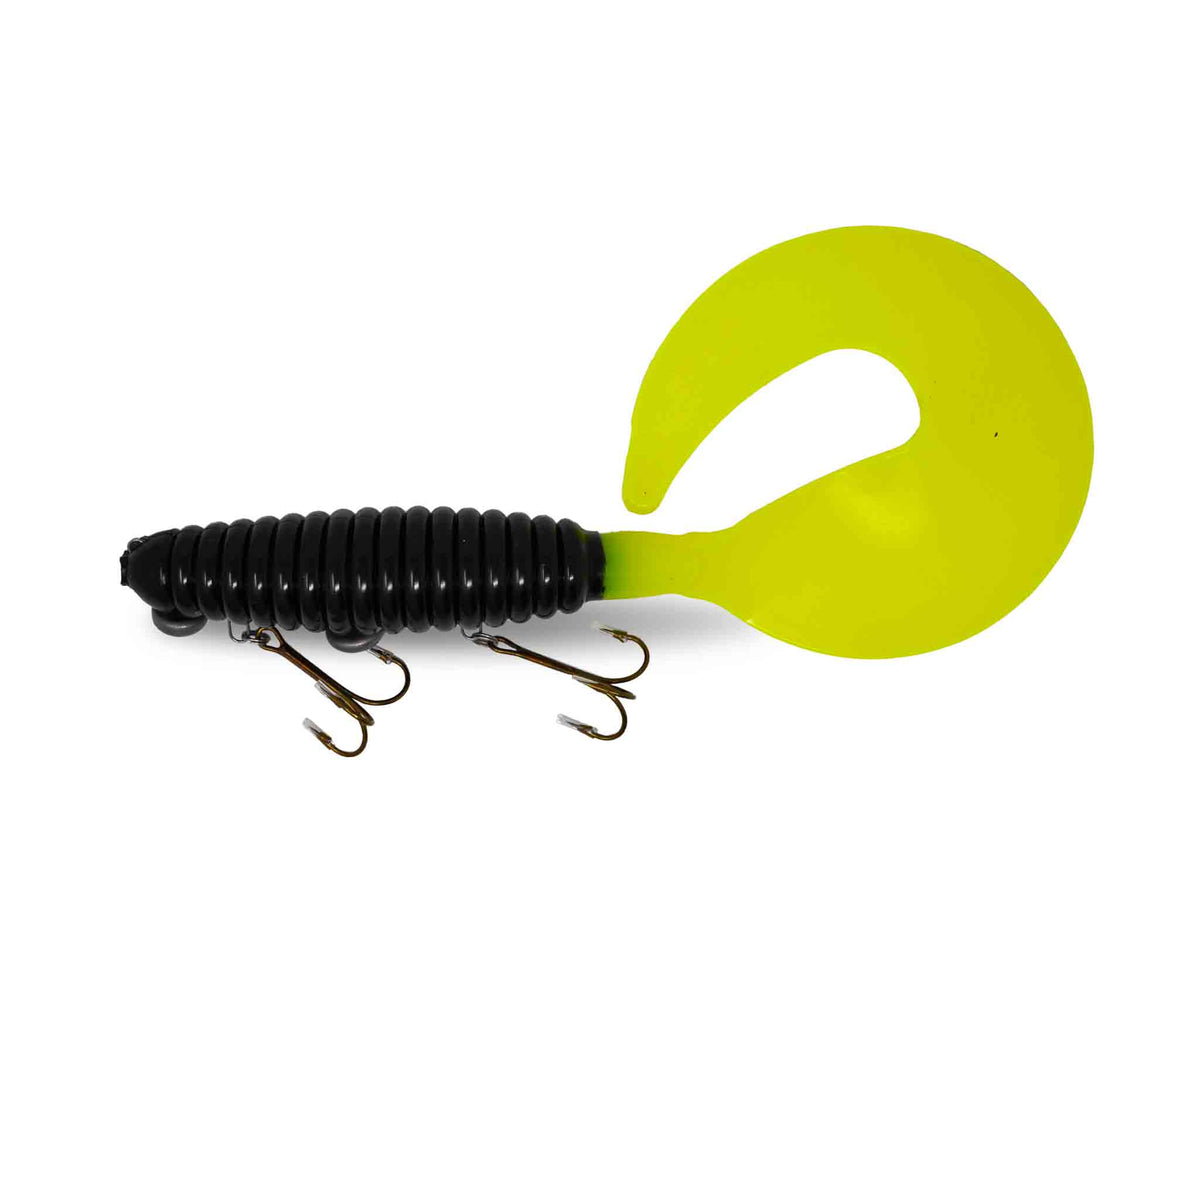 View of Rubber Whale Tail Plastics 14" Black / Lemon Tail available at EZOKO Pike and Musky Shop